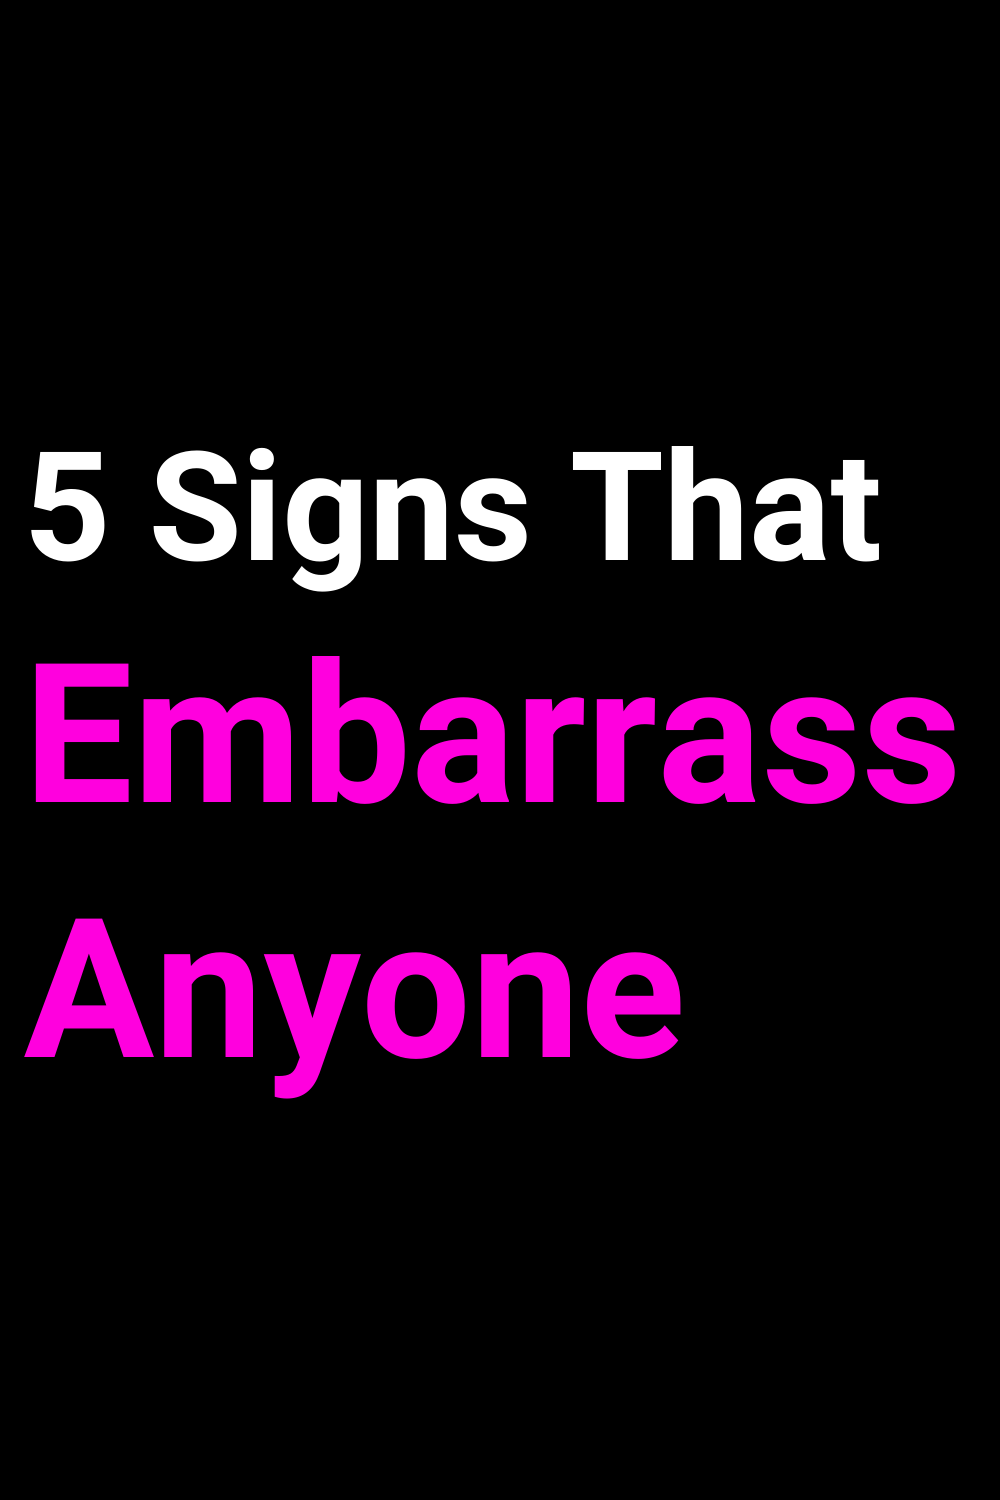 5 Signs That Embarrass Anyone